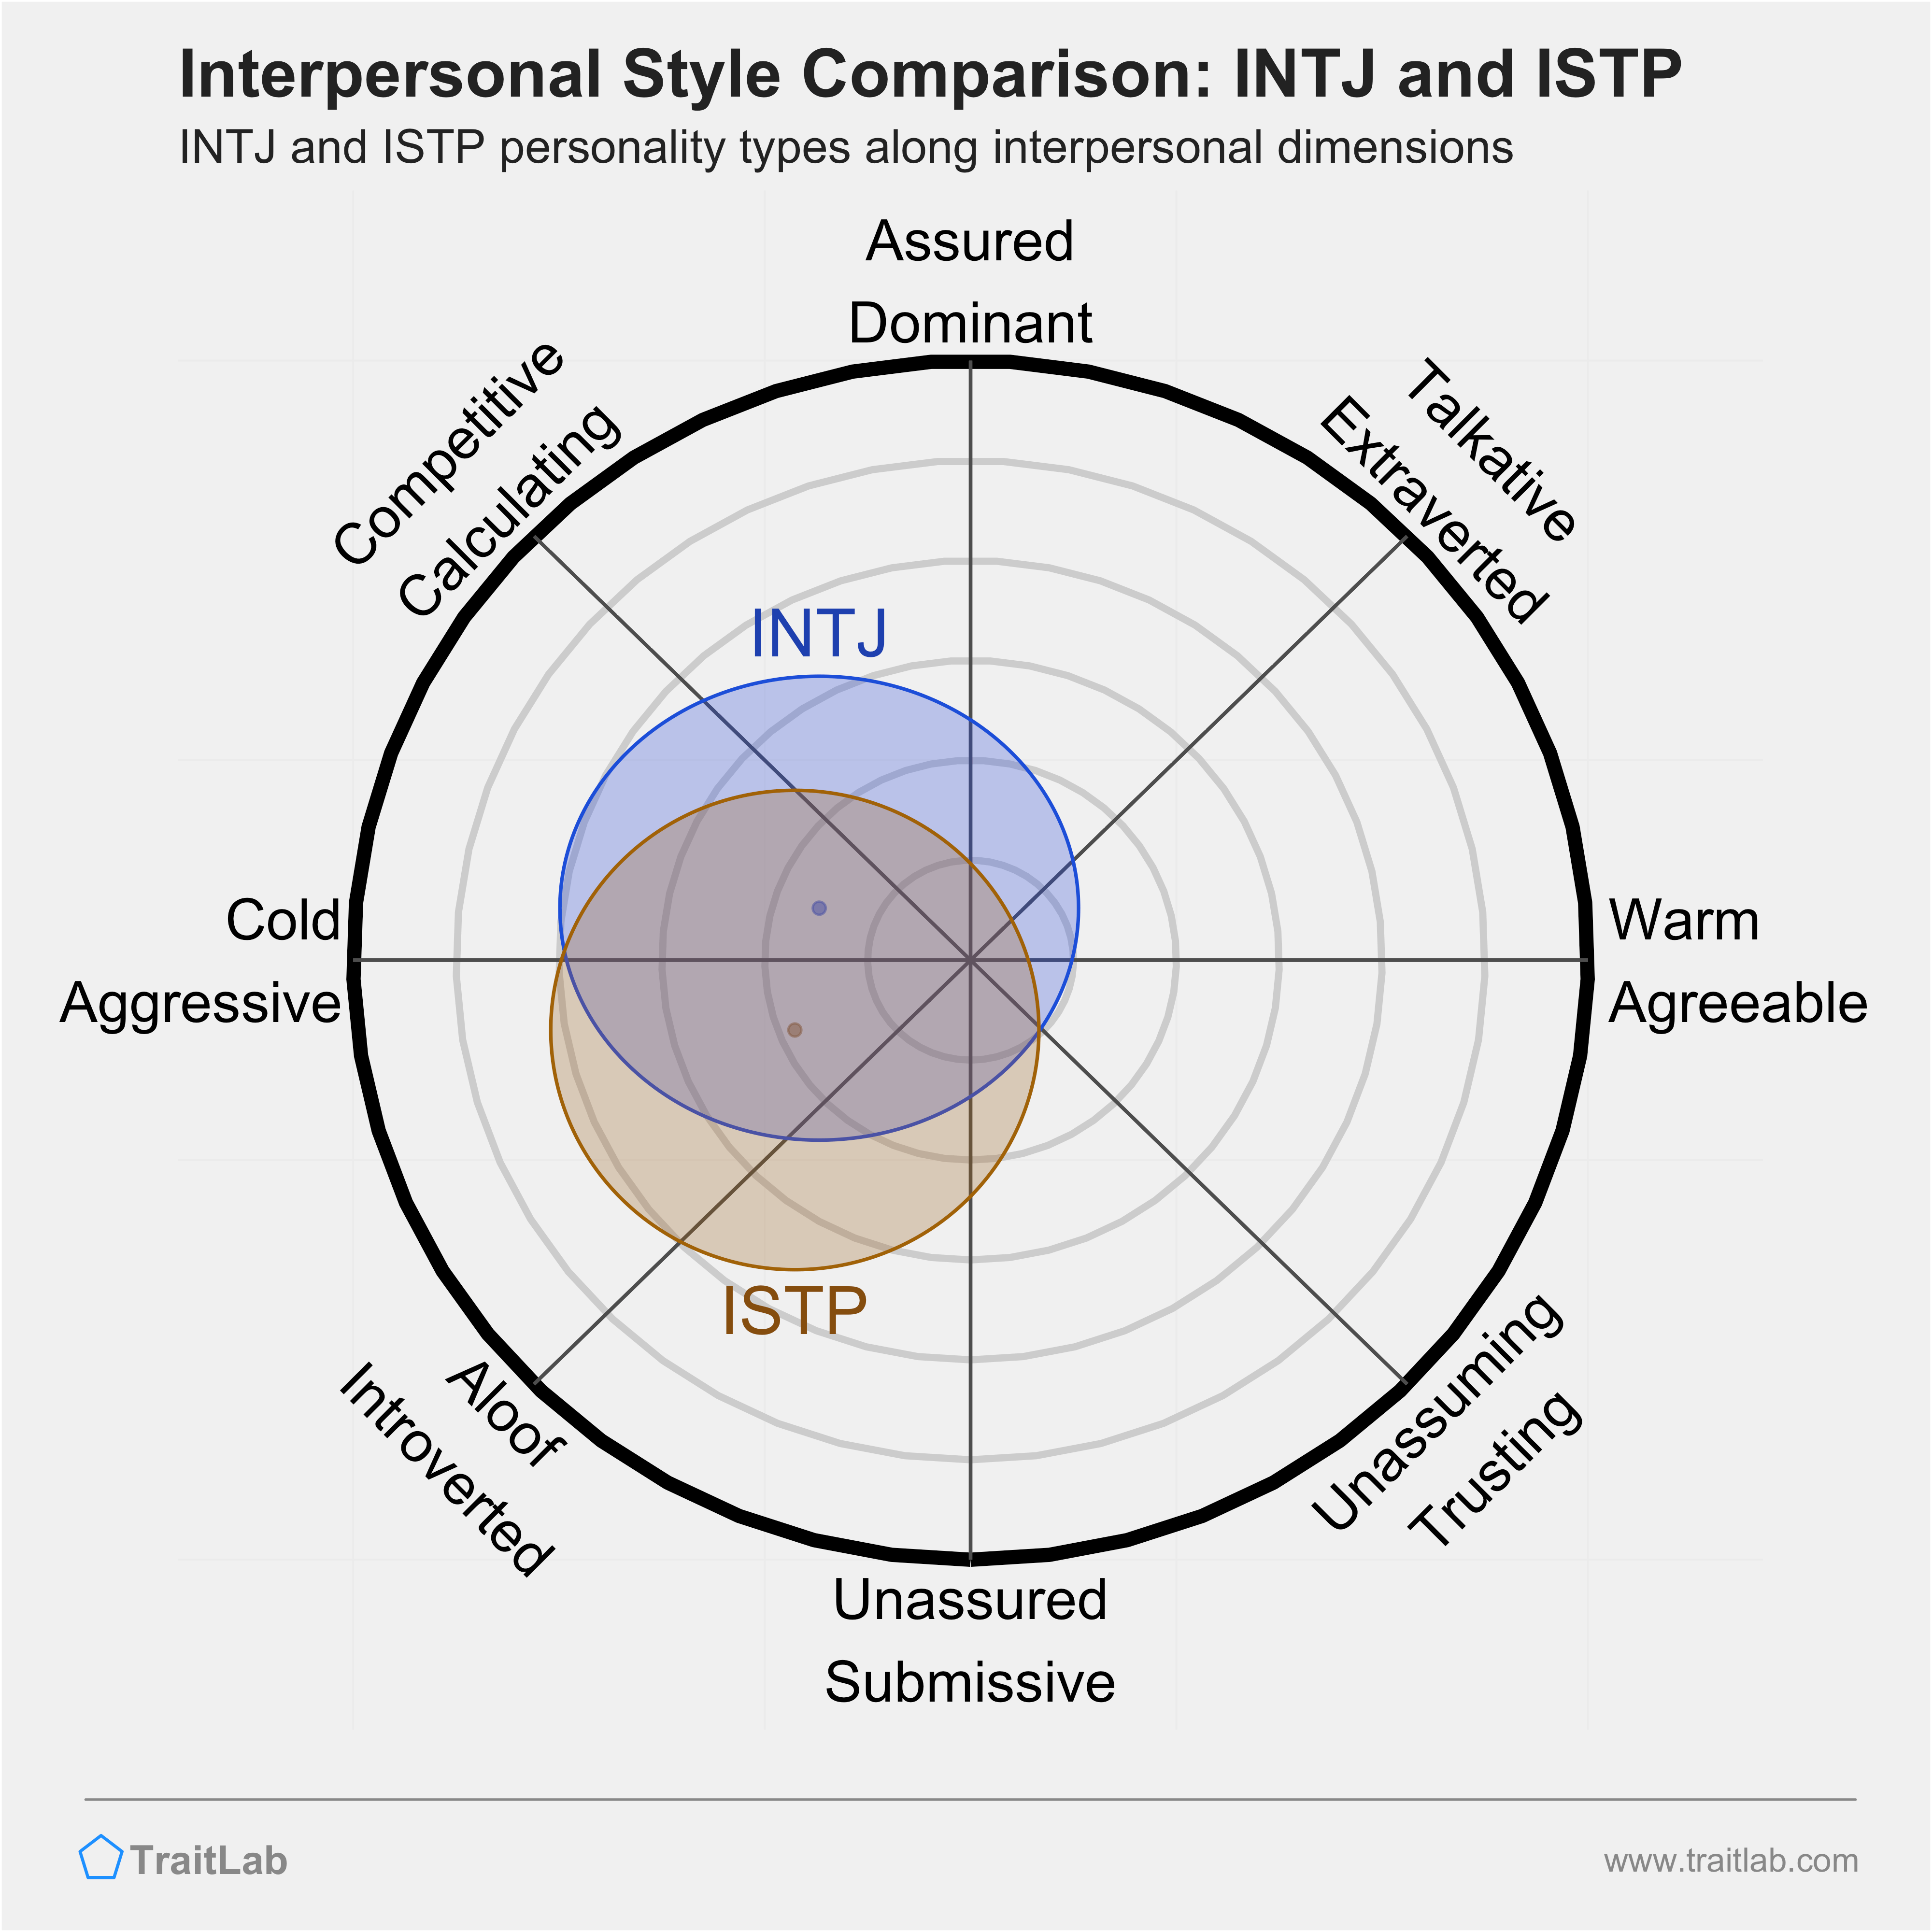 INTJ and ISTP comparison across interpersonal dimensions